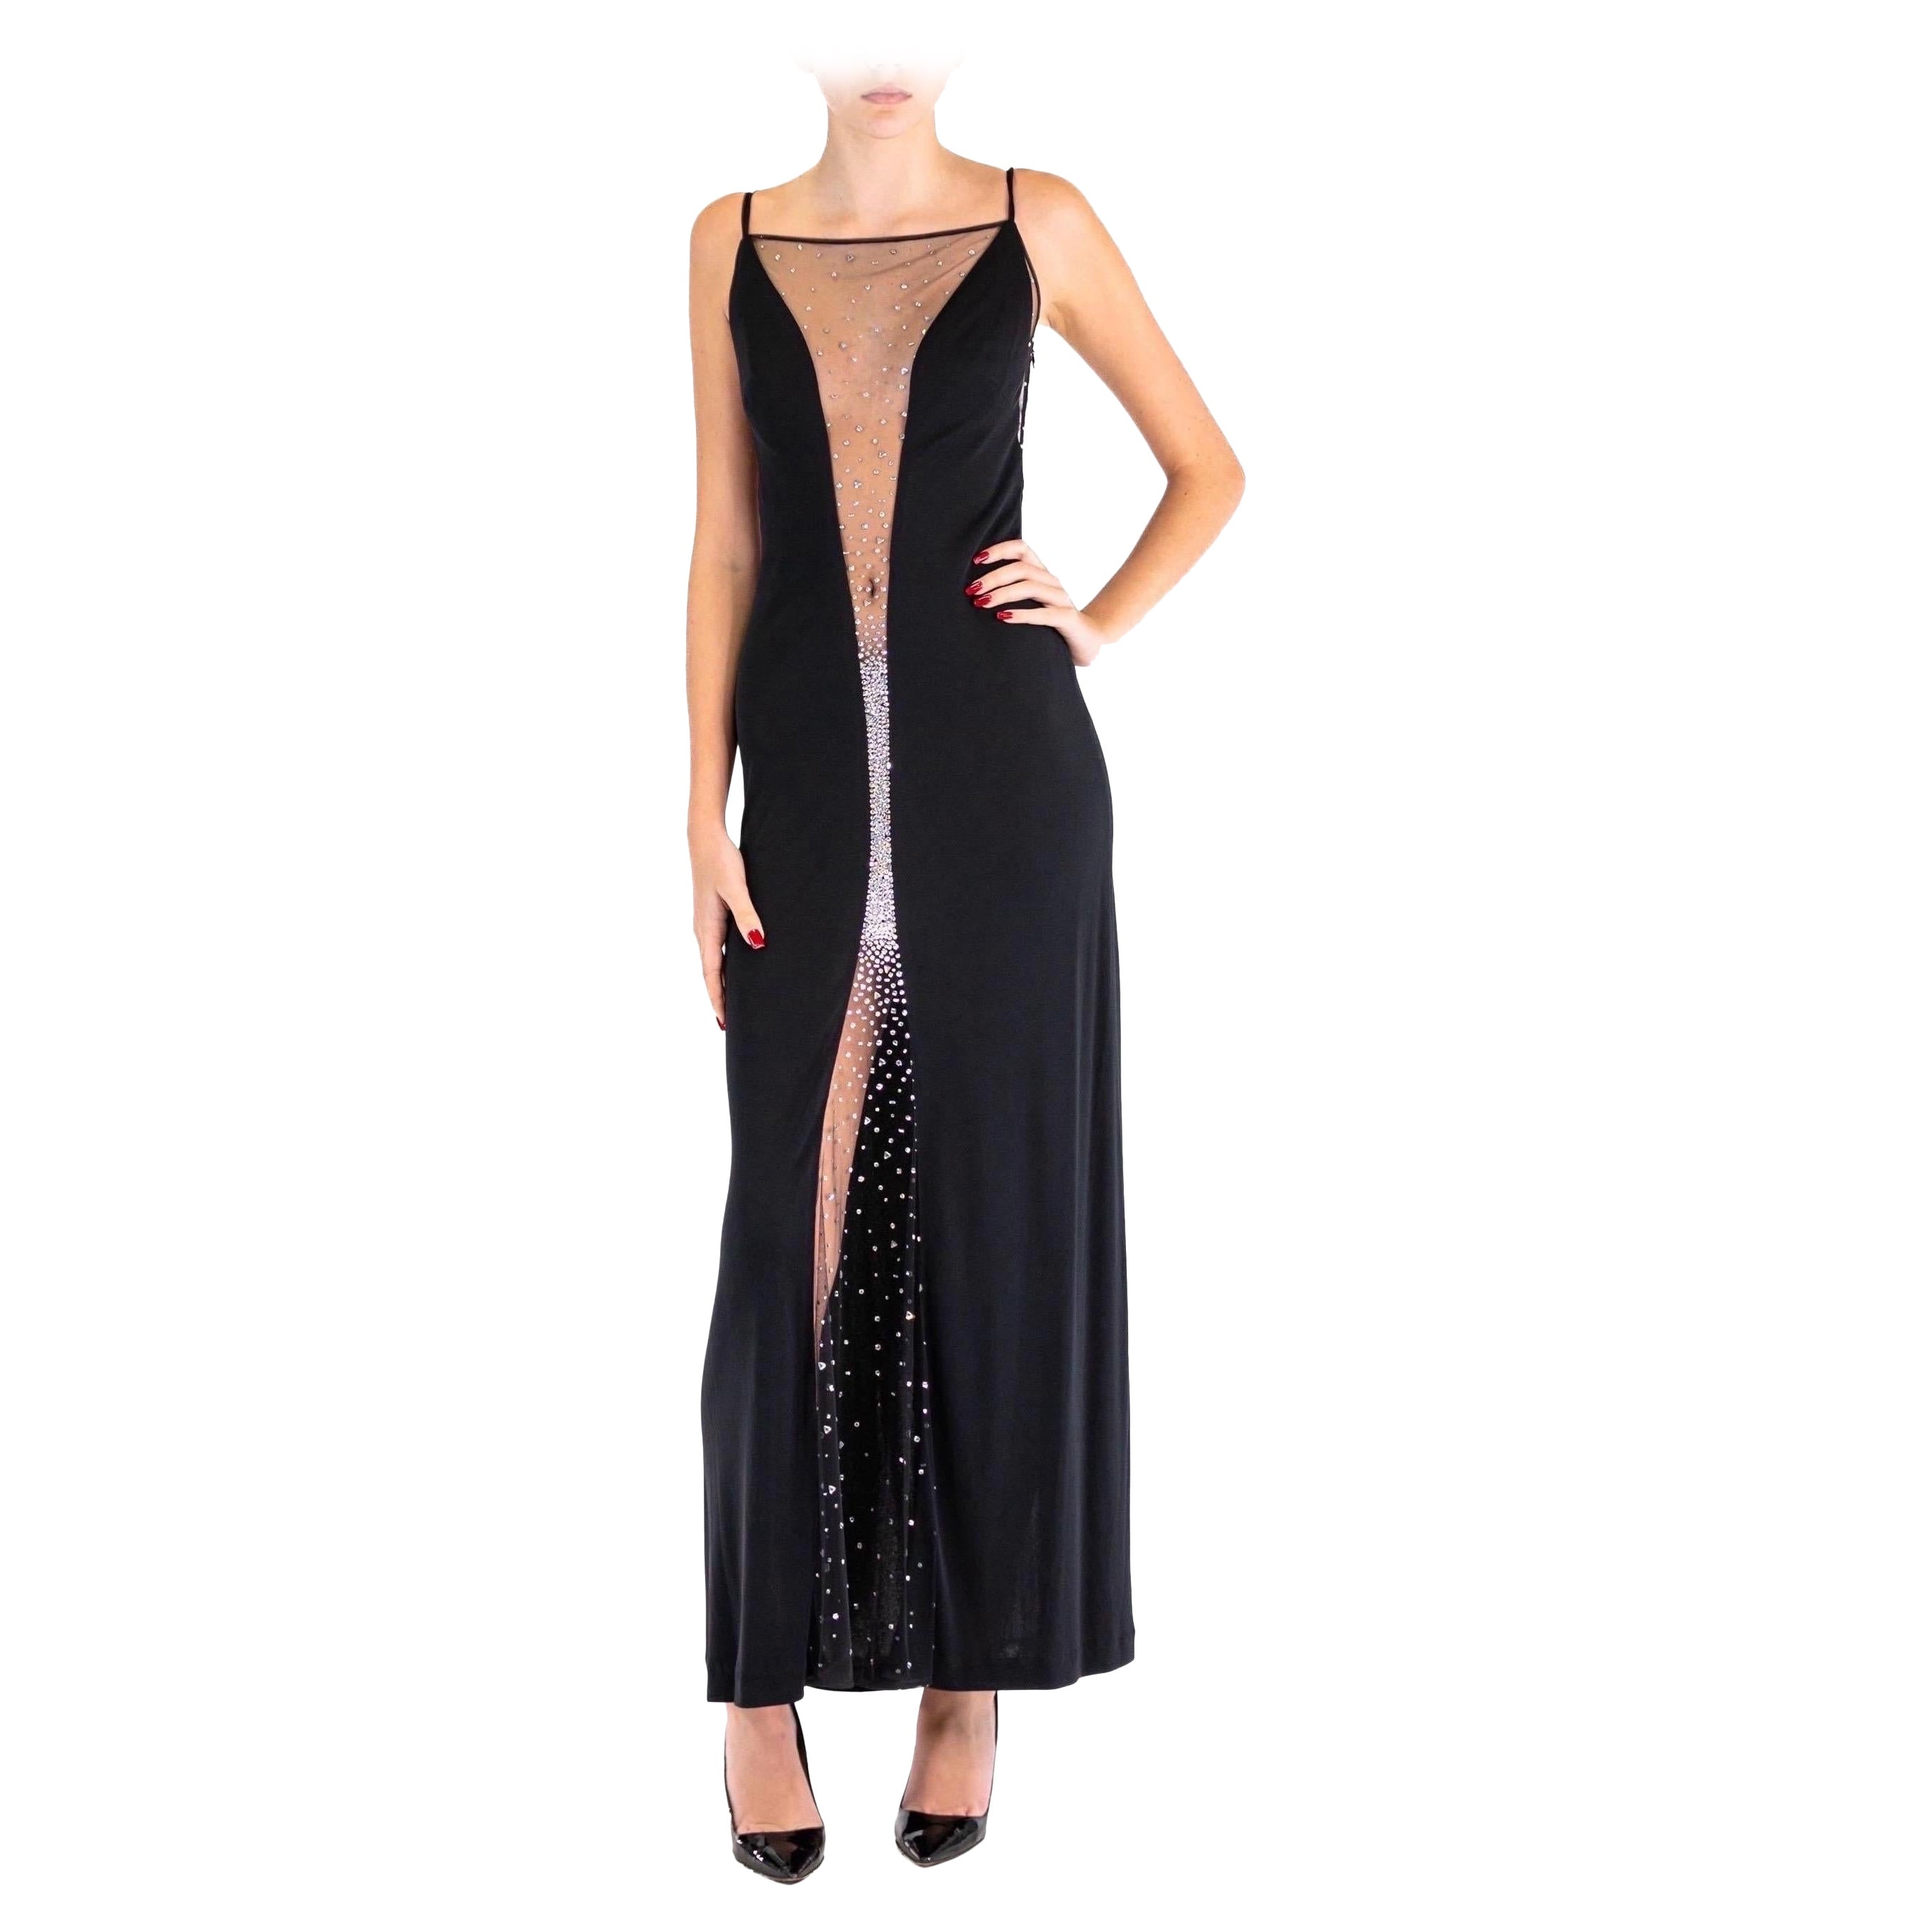 1990S JIKI Black Slinky Rayon Deep V Gown With Crystal Covered Sheer Mesh For Sale